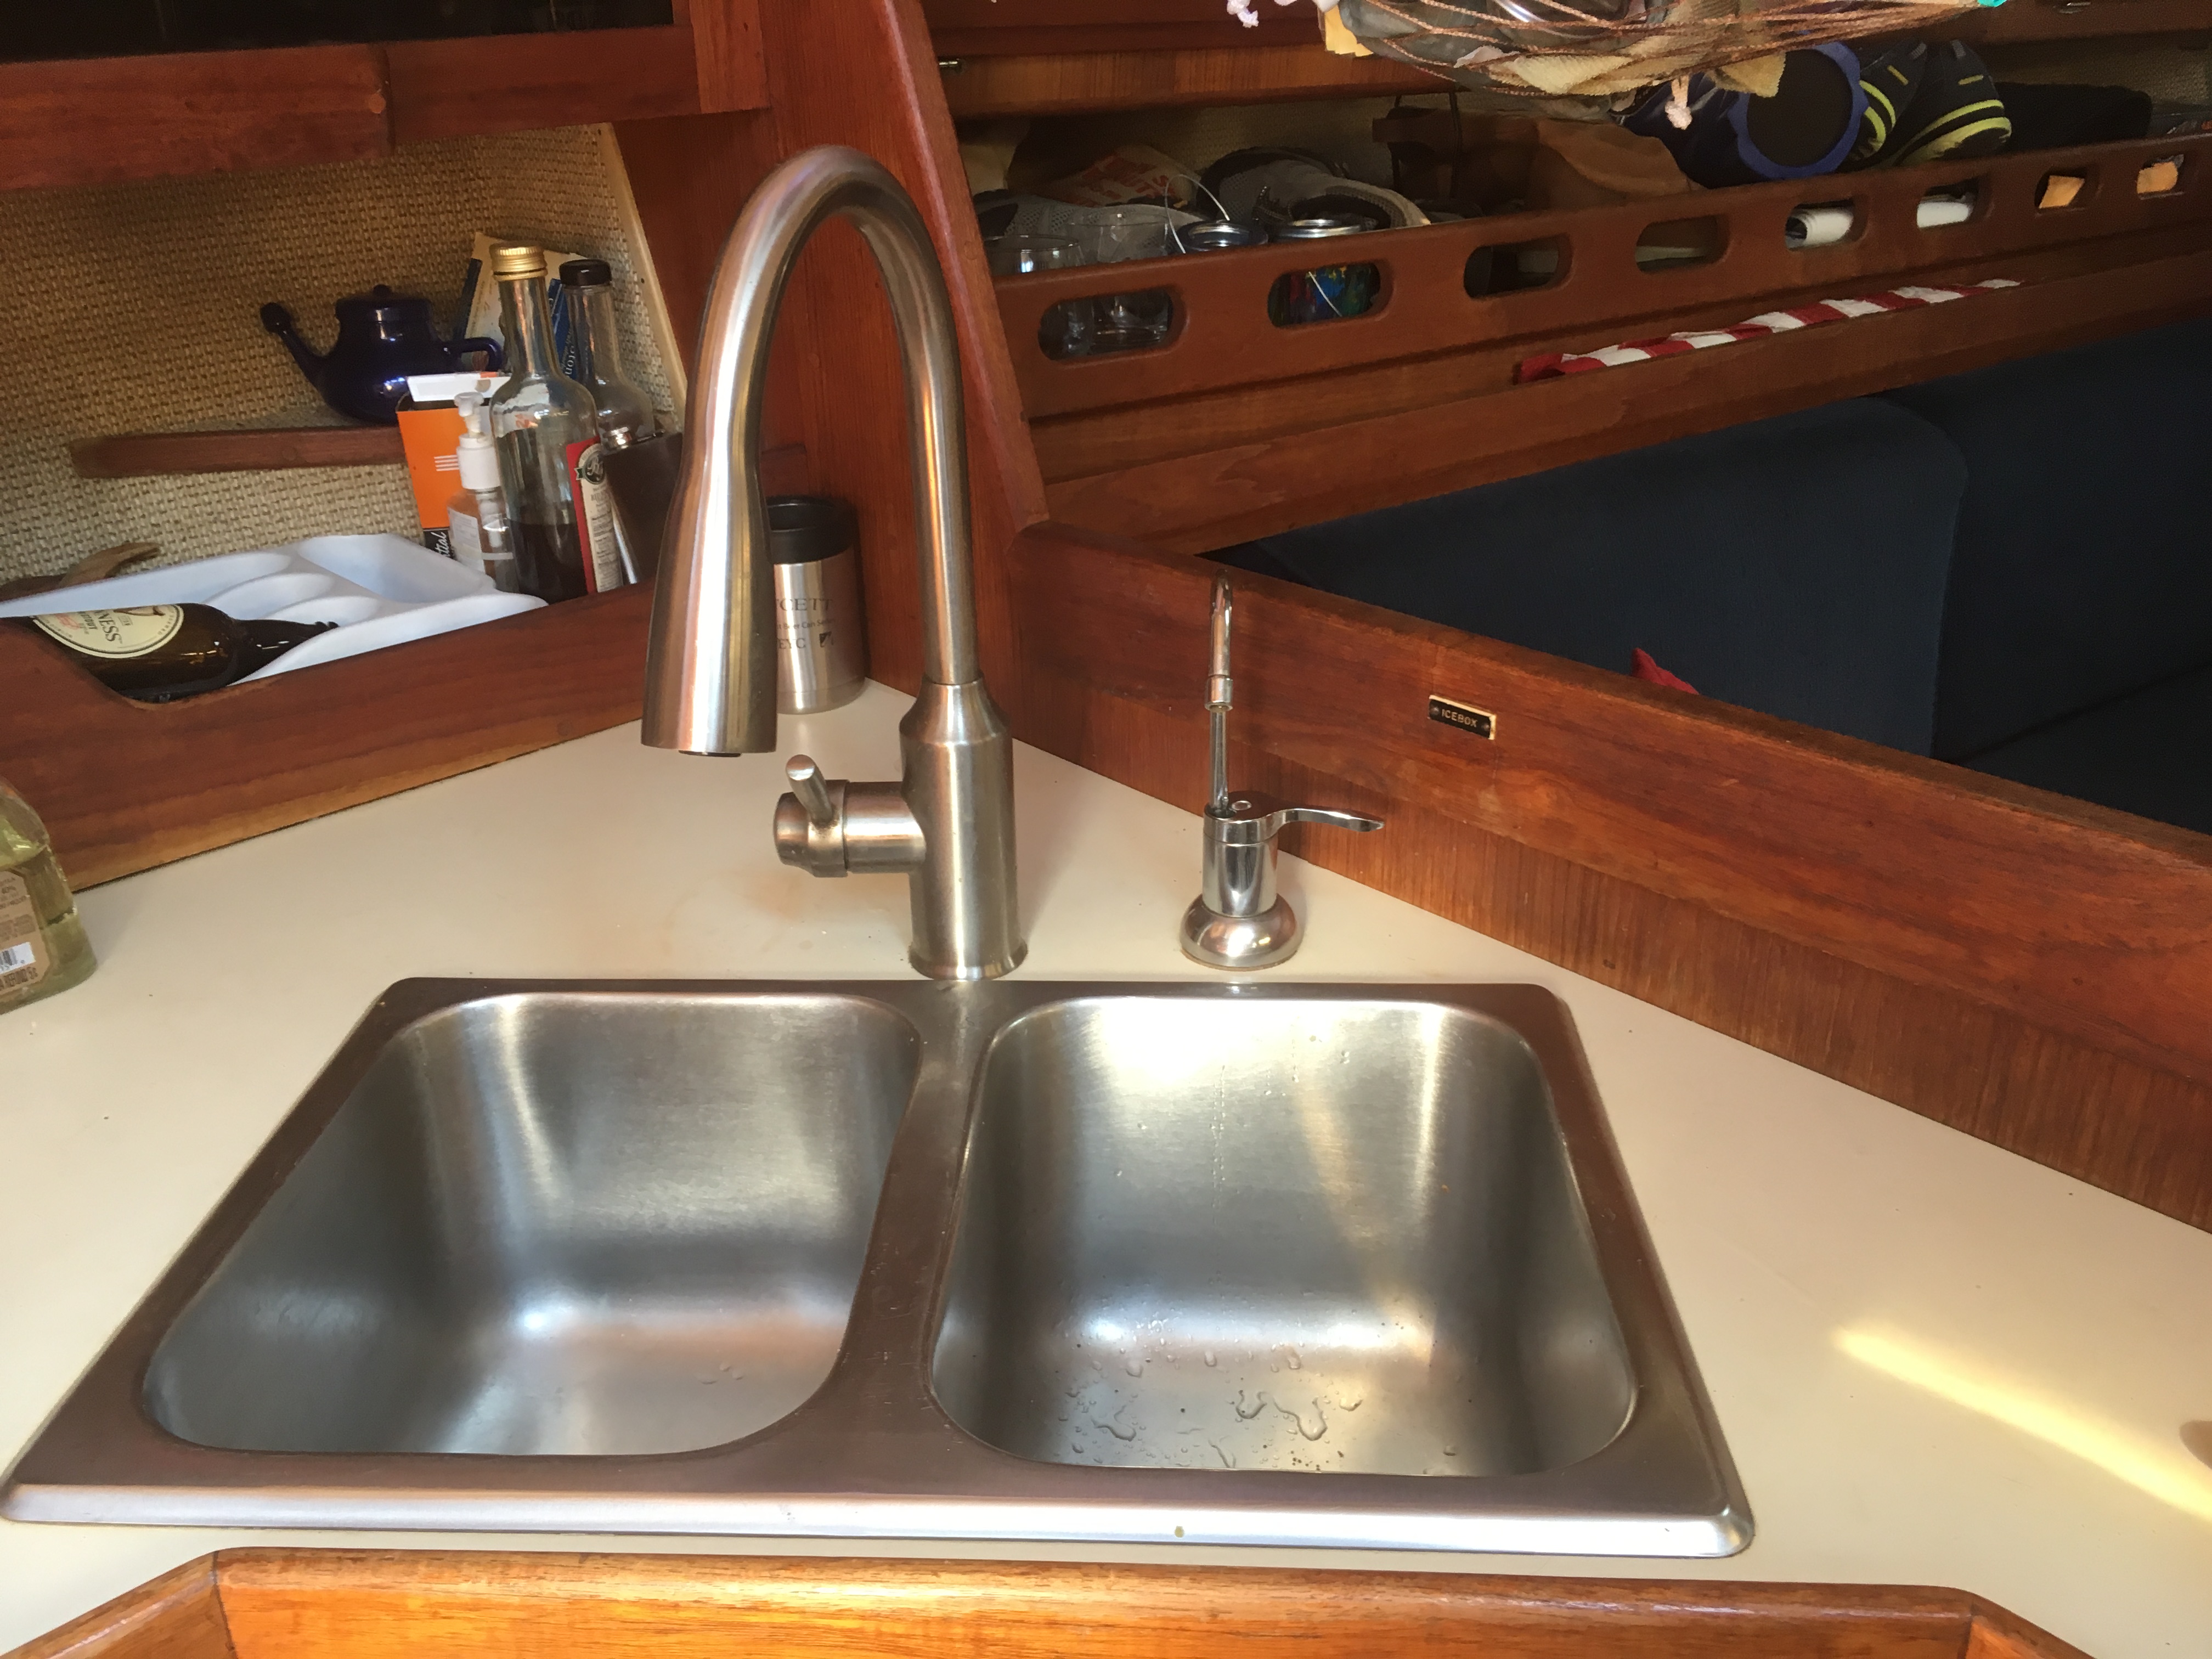 This $180 water filtration system was purchased at the boat show (see filtered water faucet at right)